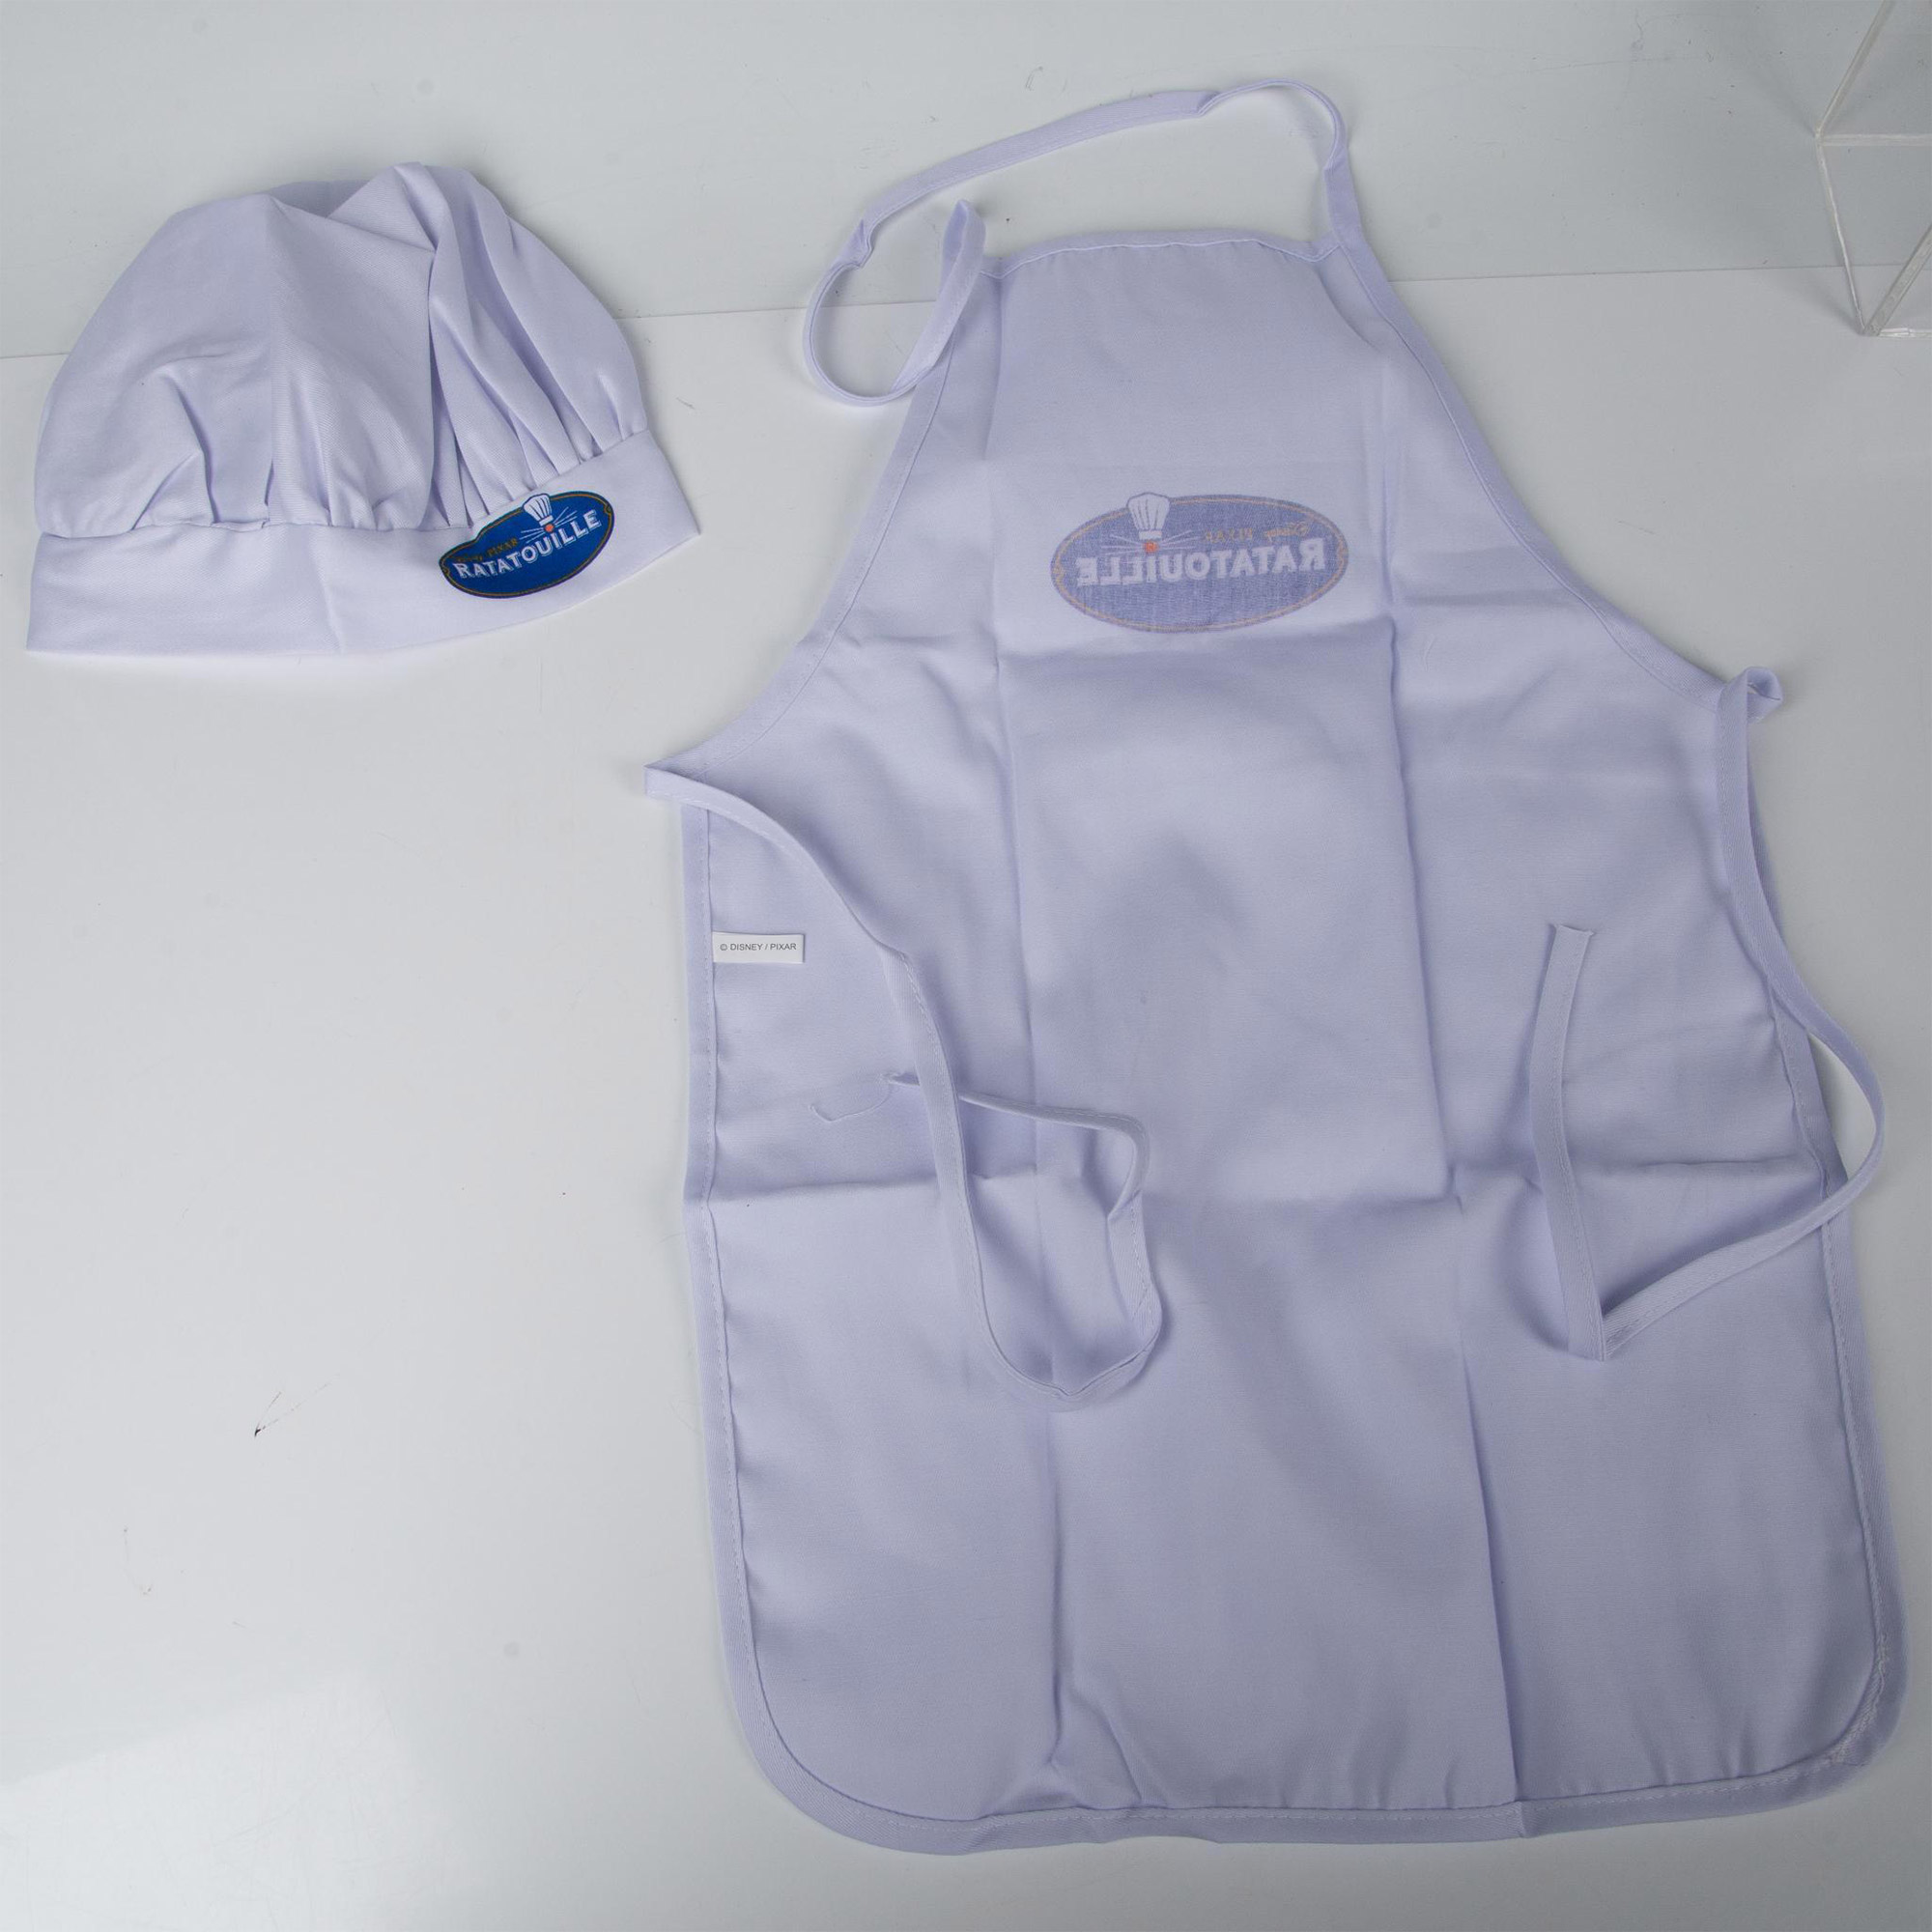 Adorable Disney Pixar Ratatouille Youth Apron and Chef's Hat - Image 5 of 7